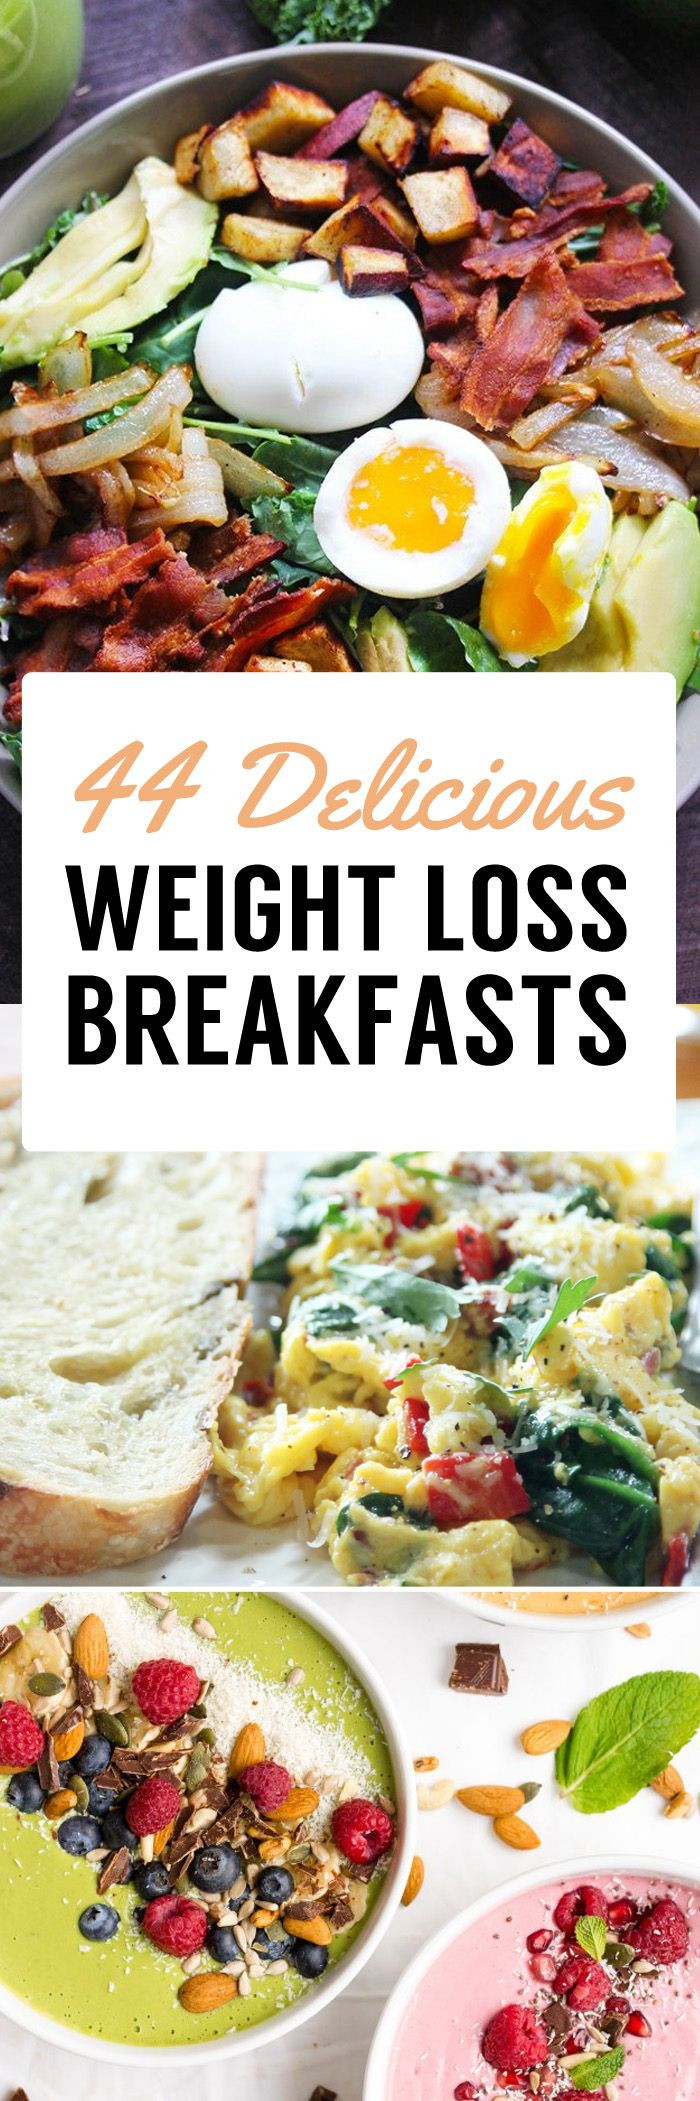 Healthy Fats For Breakfast
 44 Weight Loss Breakfast Recipes To Jumpstart Your Fat